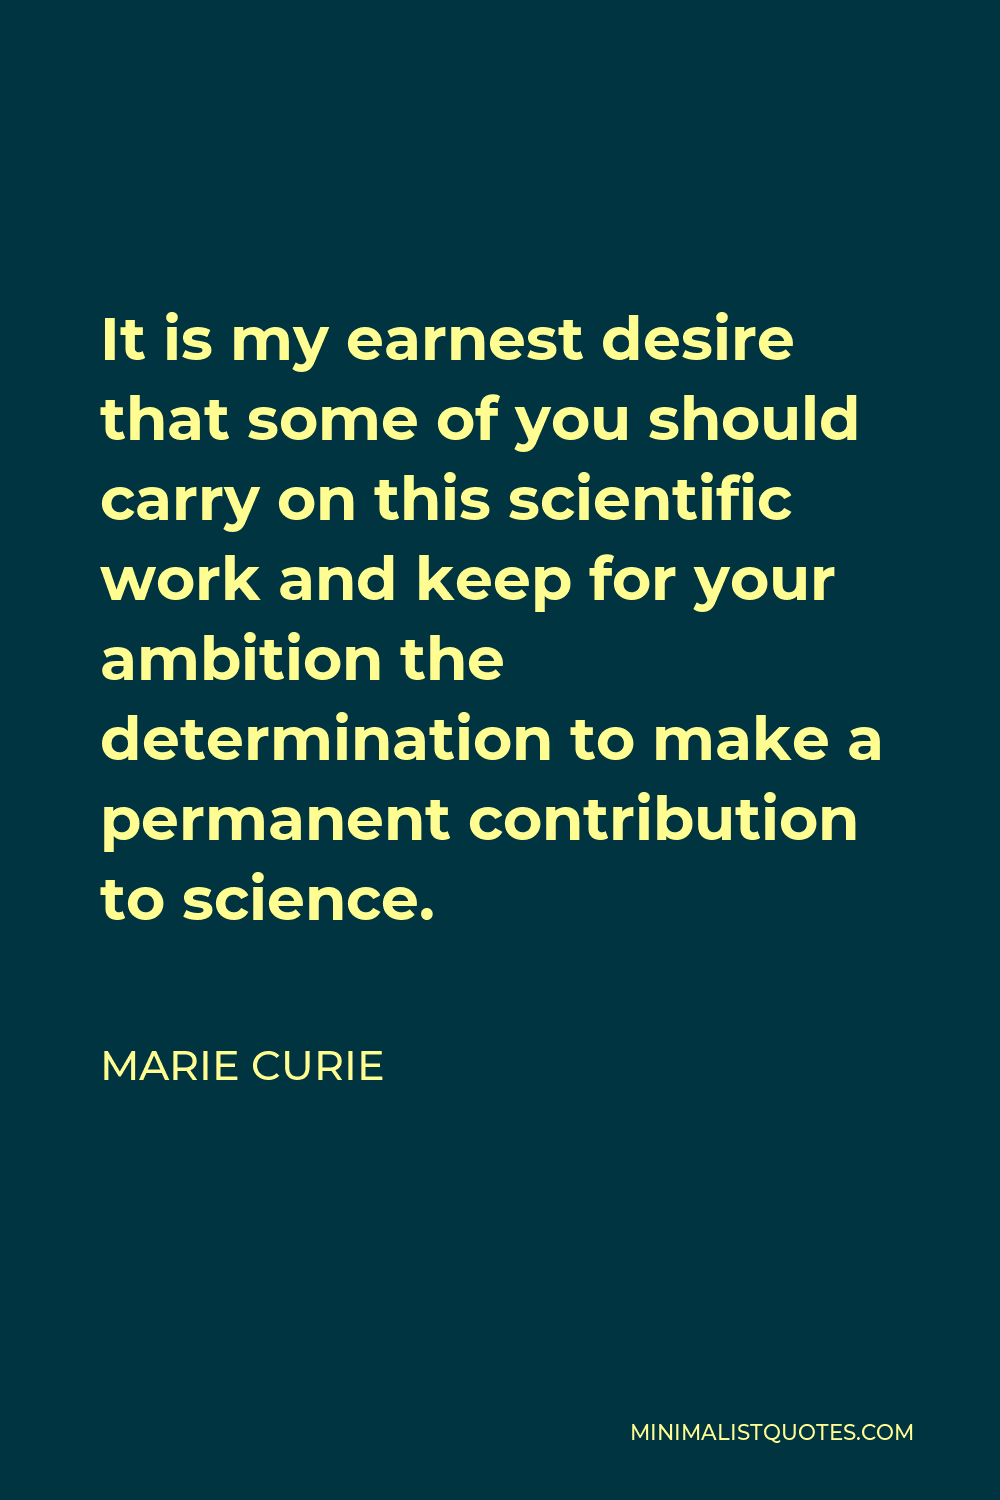 Marie Curie Quote - It is my earnest desire that some of you should carry on this scientific work and keep for your ambition the determination to make a permanent contribution to science.